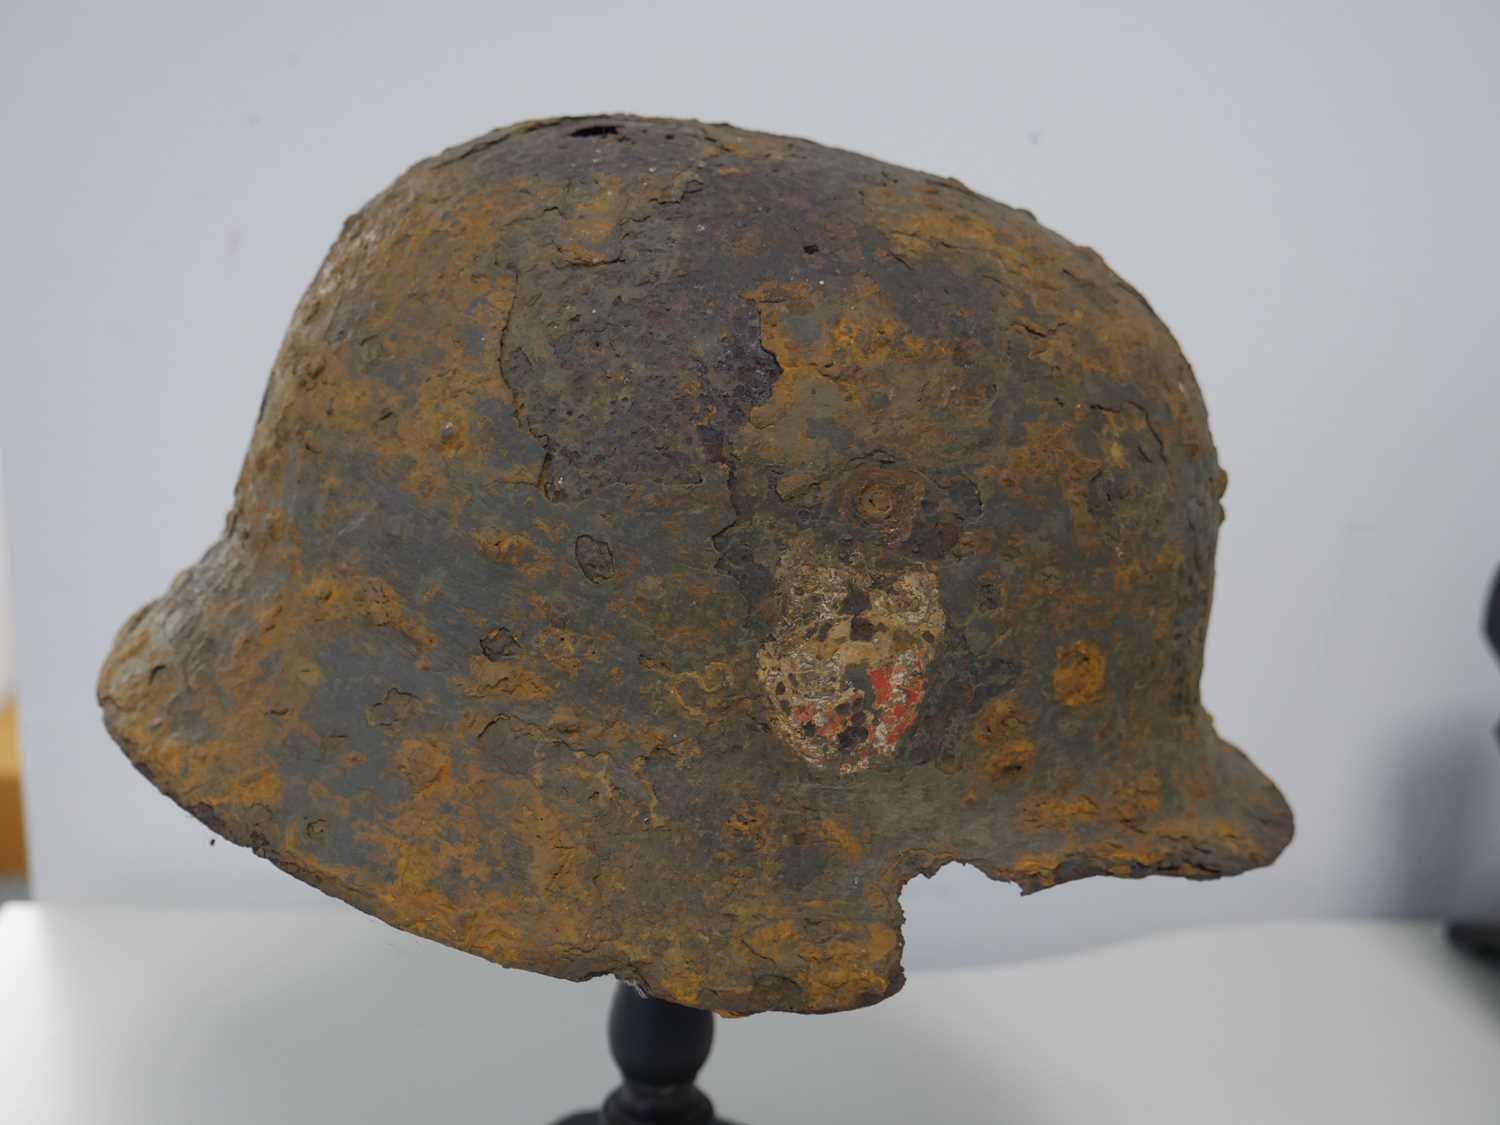 Military helmet bearing Nazi insignia on purpose built wooden stand Heavy rusting and deterioration - Image 5 of 6